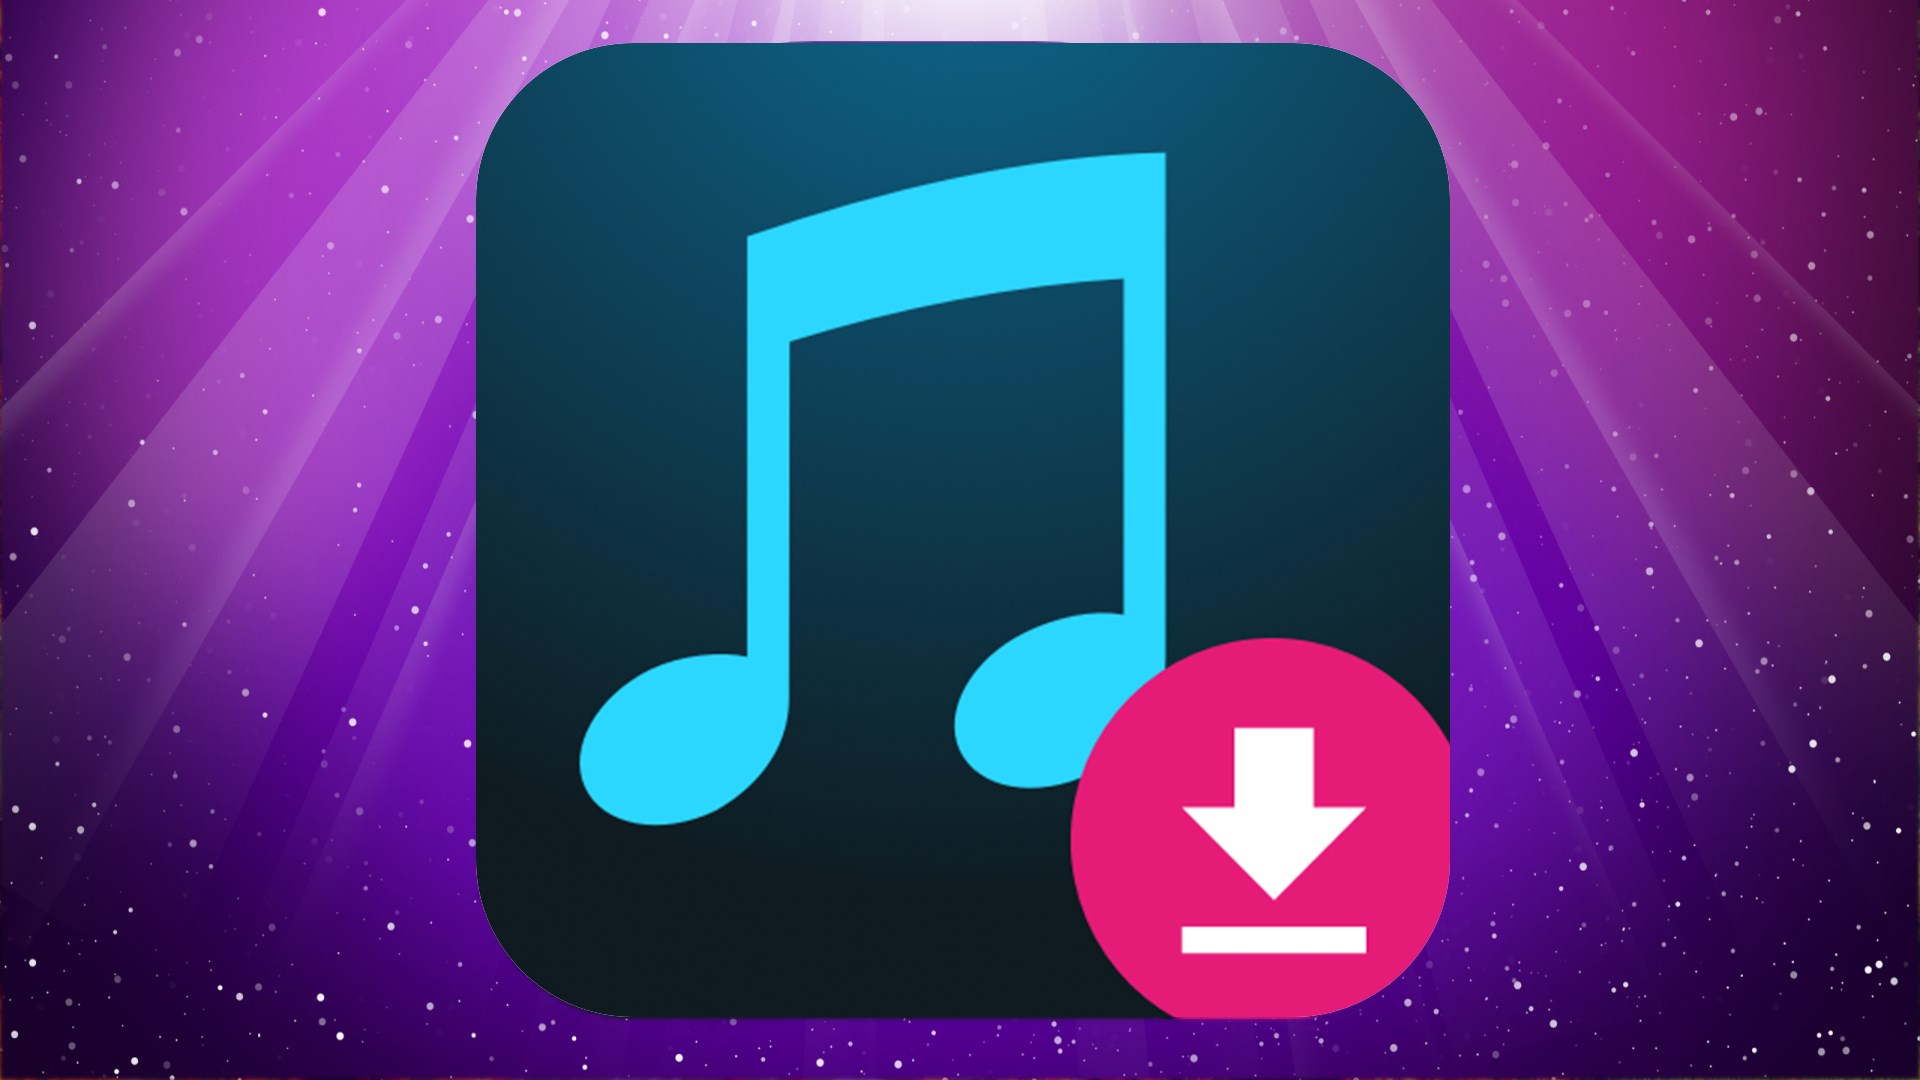 add my photo mp3 song software download